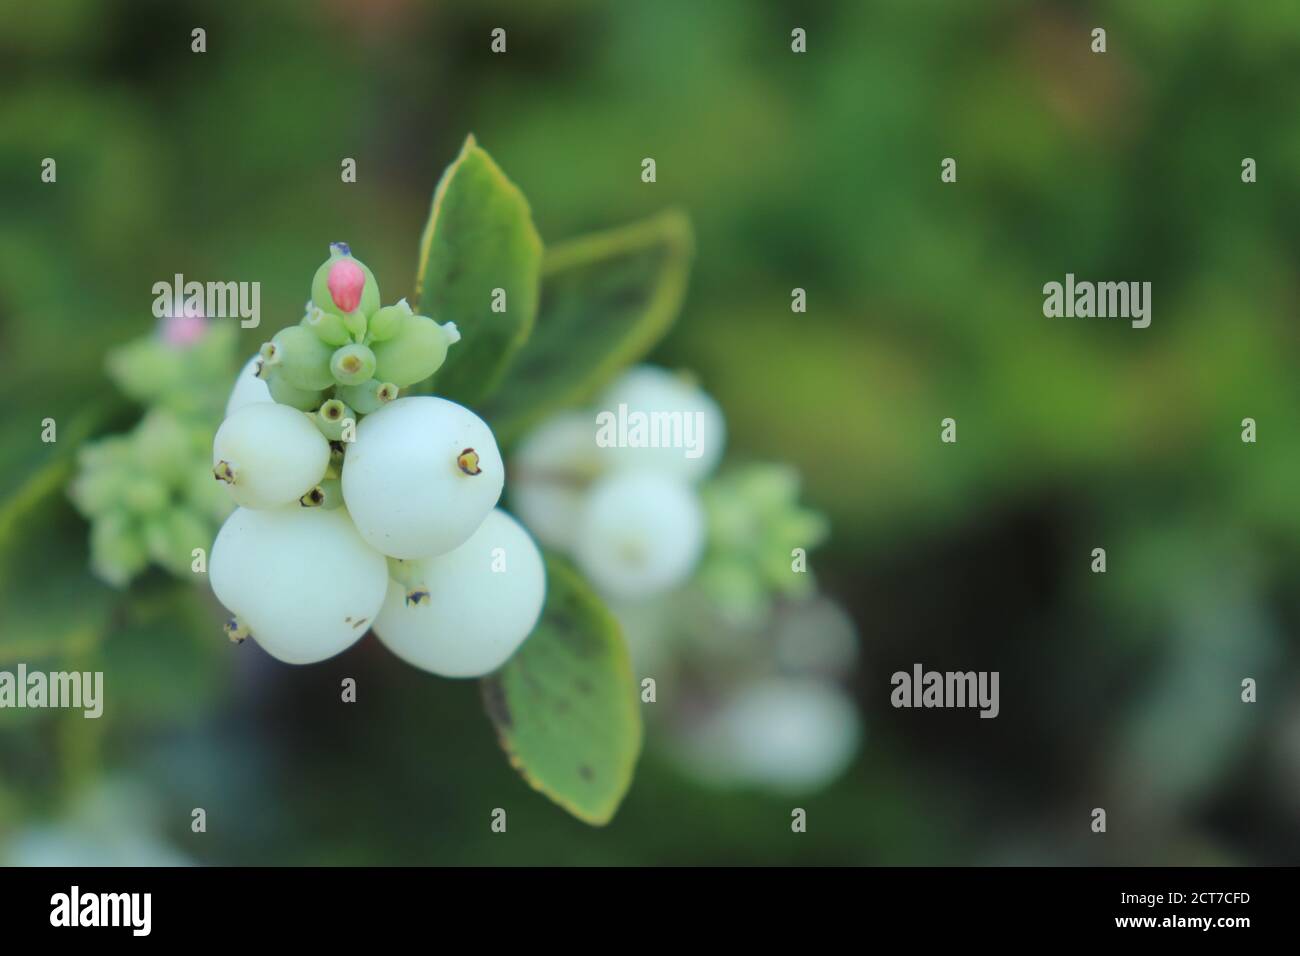 Branch with white berries with small flowers of the White pearl (lat. Symphoricarpos albus) Stock Photo